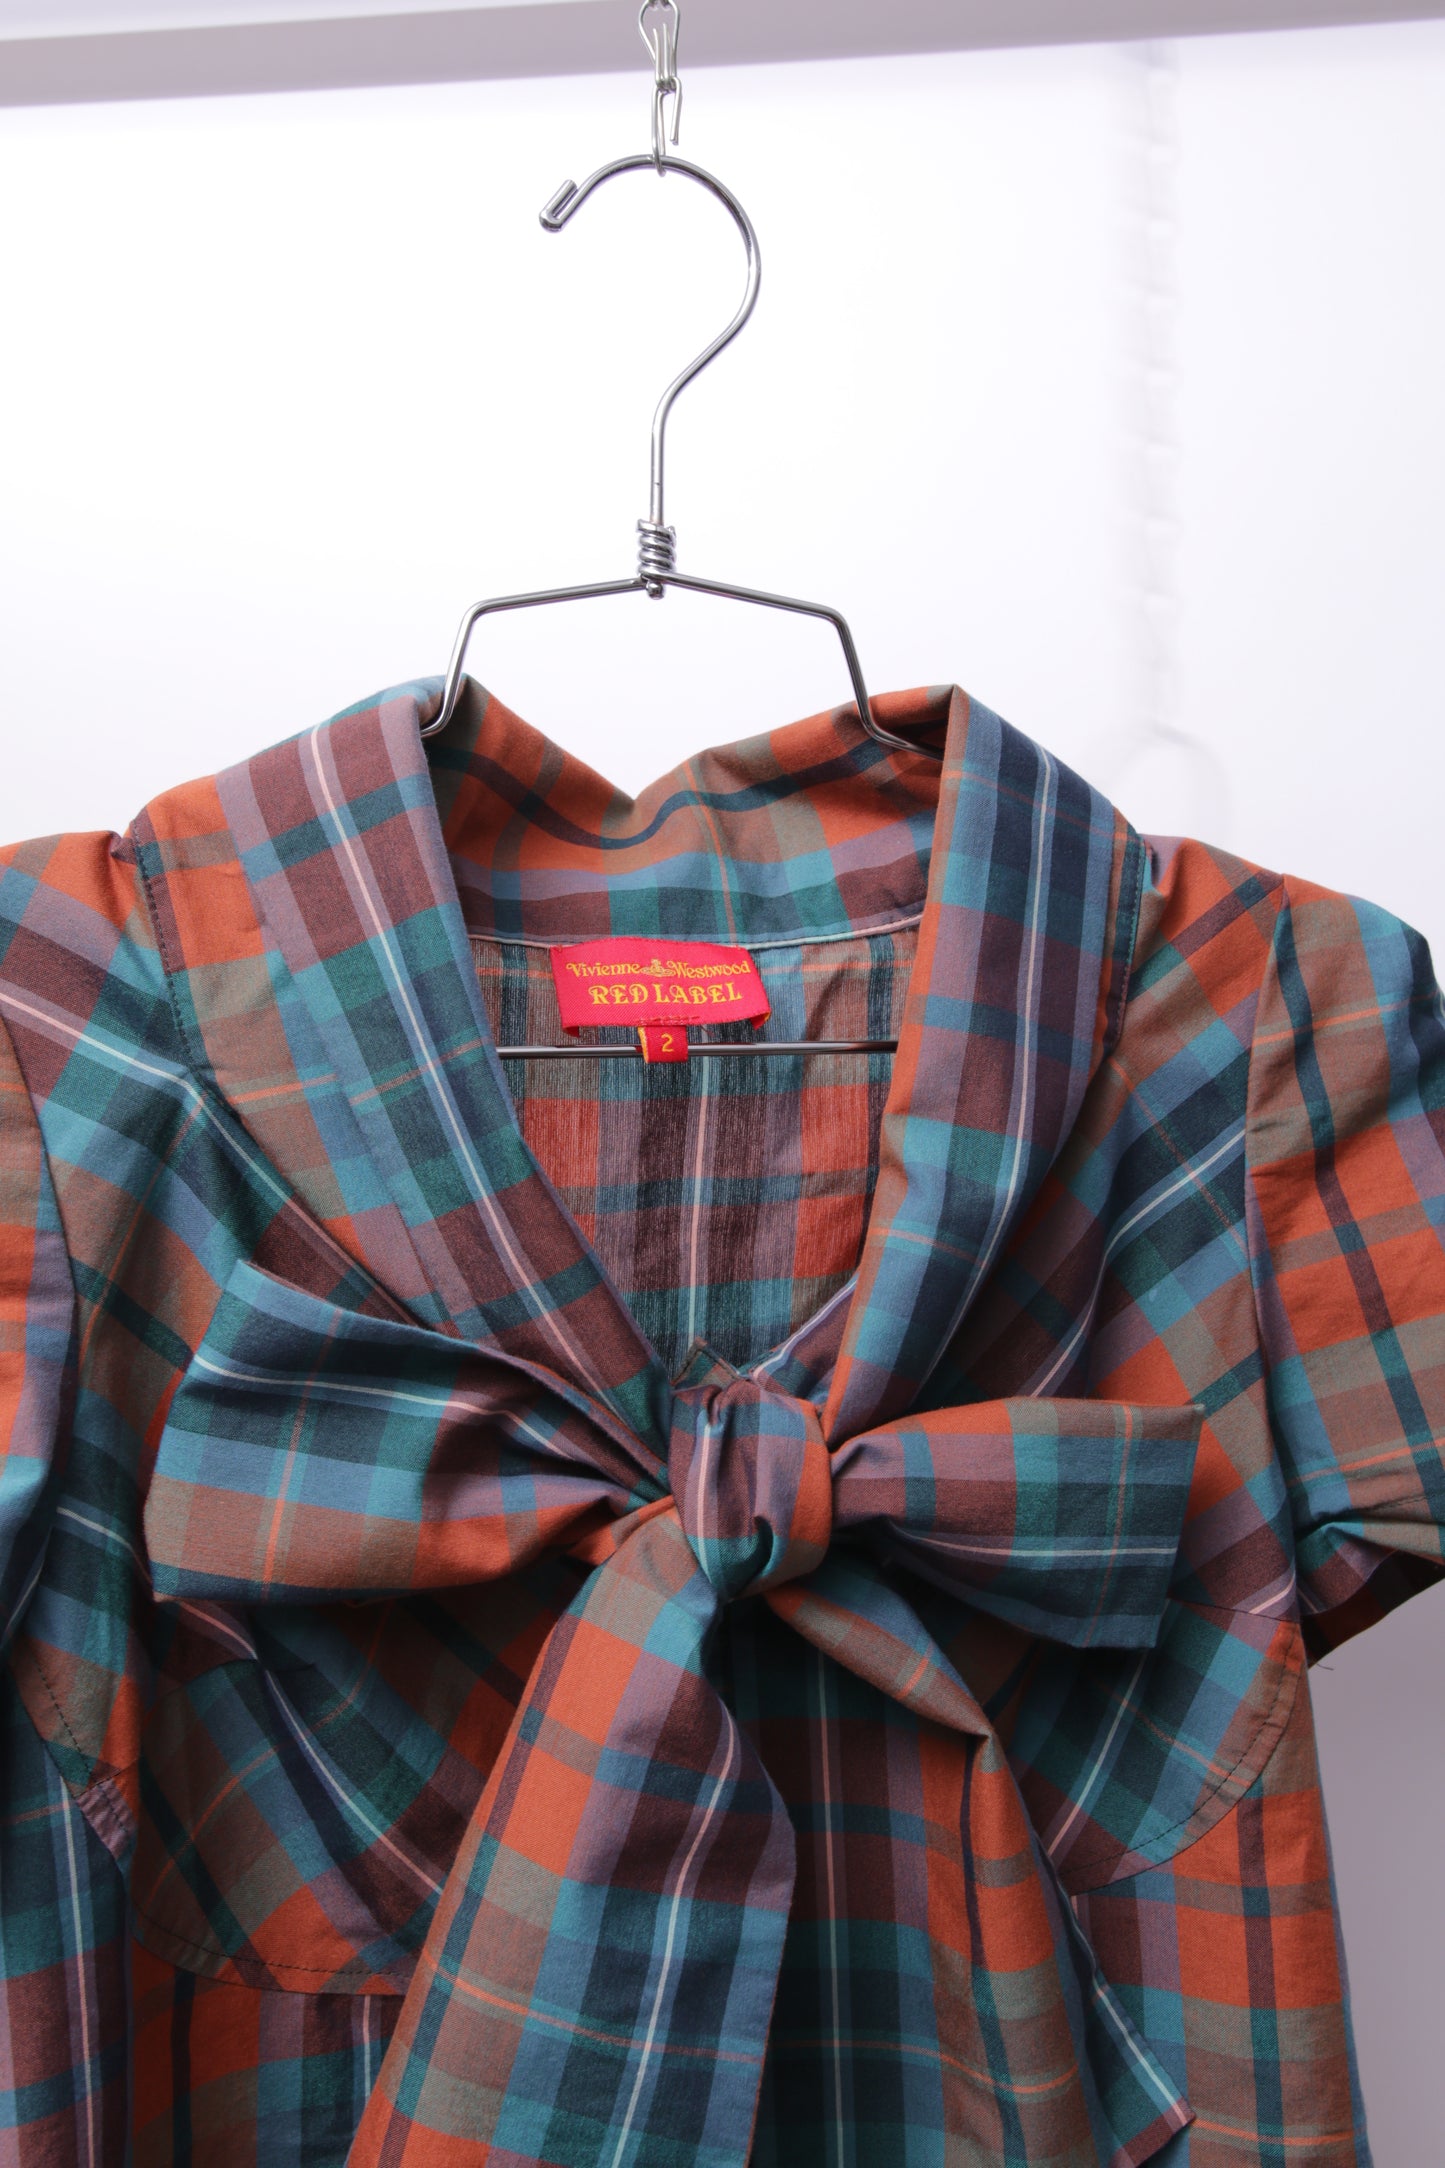 Vivienne Westwood check button up shirt with attached big bow